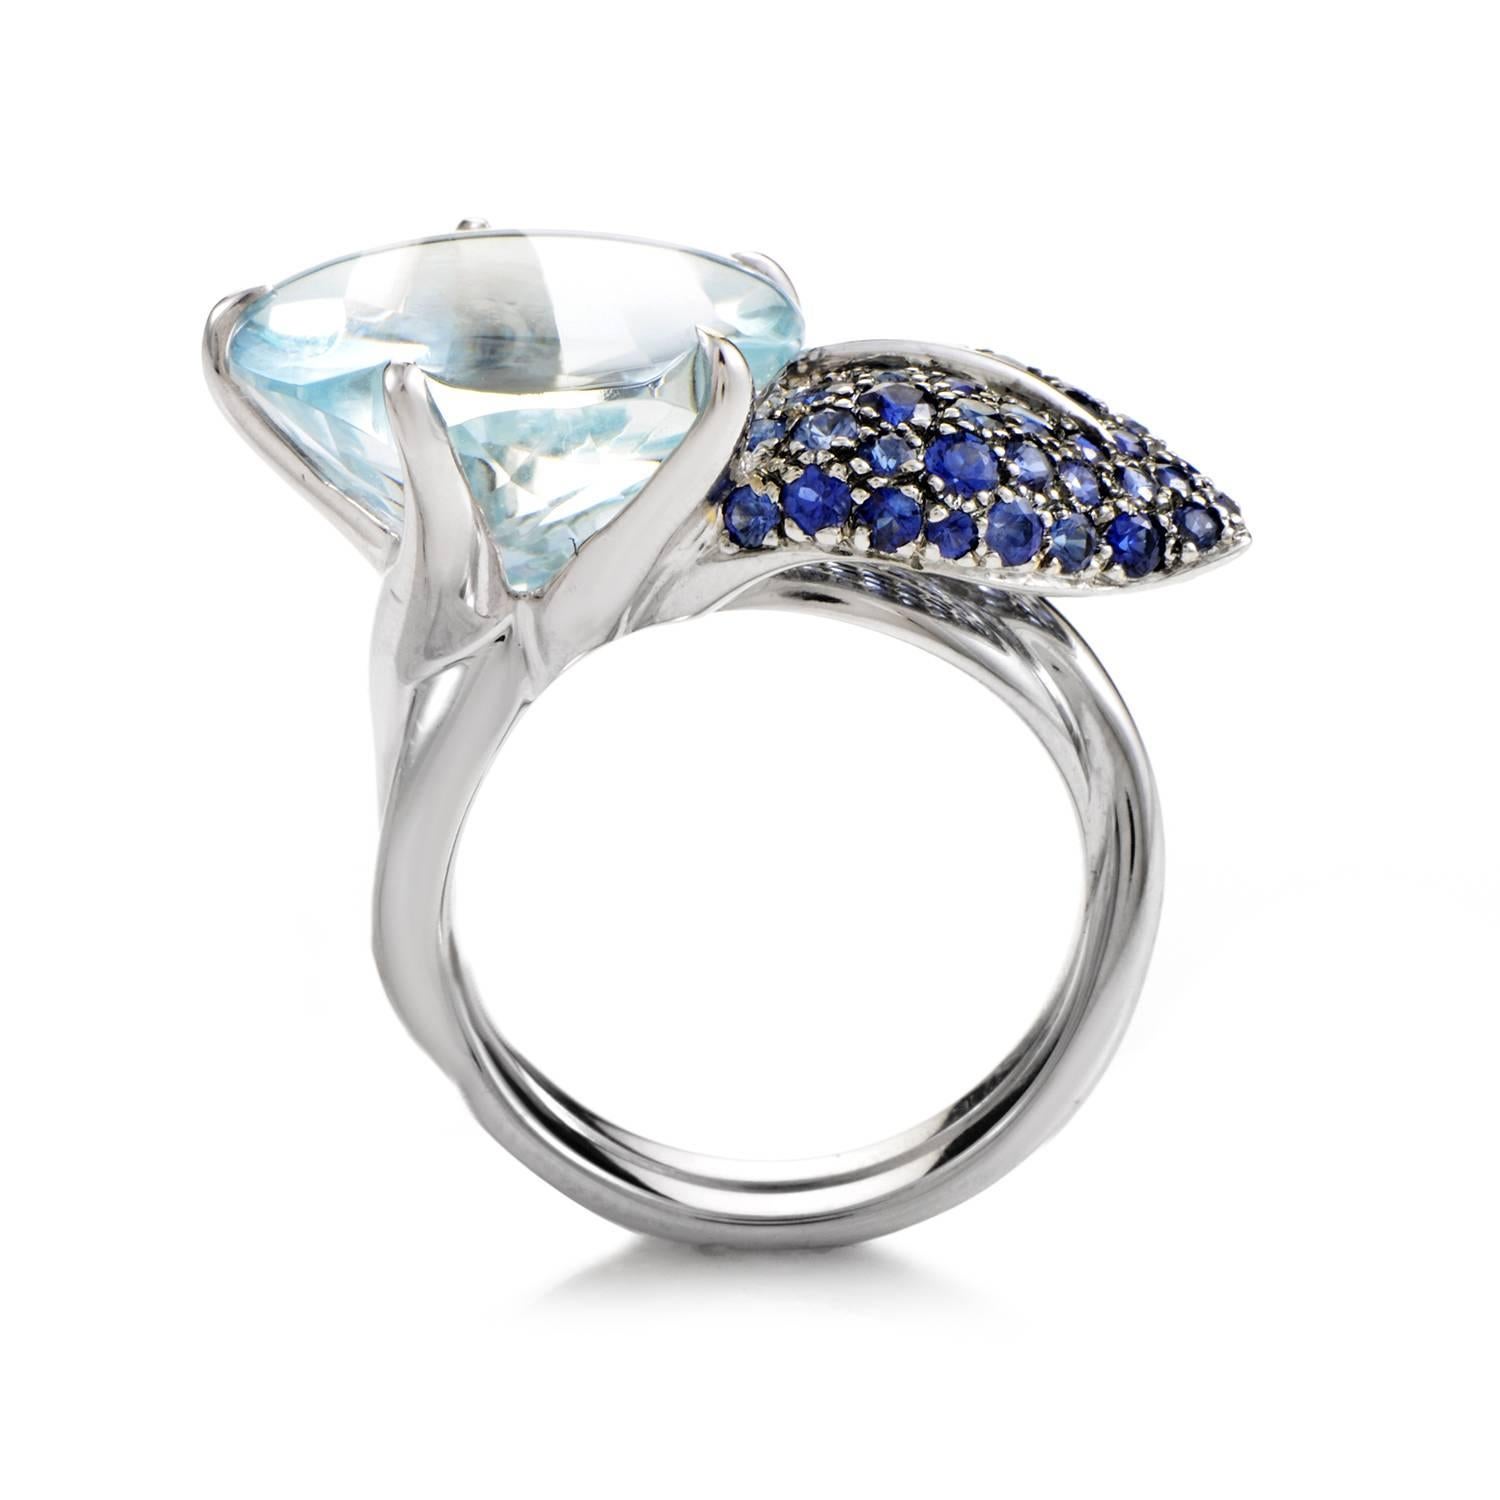 Extremely tasteful and pleasingly elegant, the utterly harmonious blend of sapphire’s royal nuance and the splendid sparkle of a majestic aquamarine gives this exquisite 18K white gold ring from Chanel immense aesthetic quality.
Included Items: